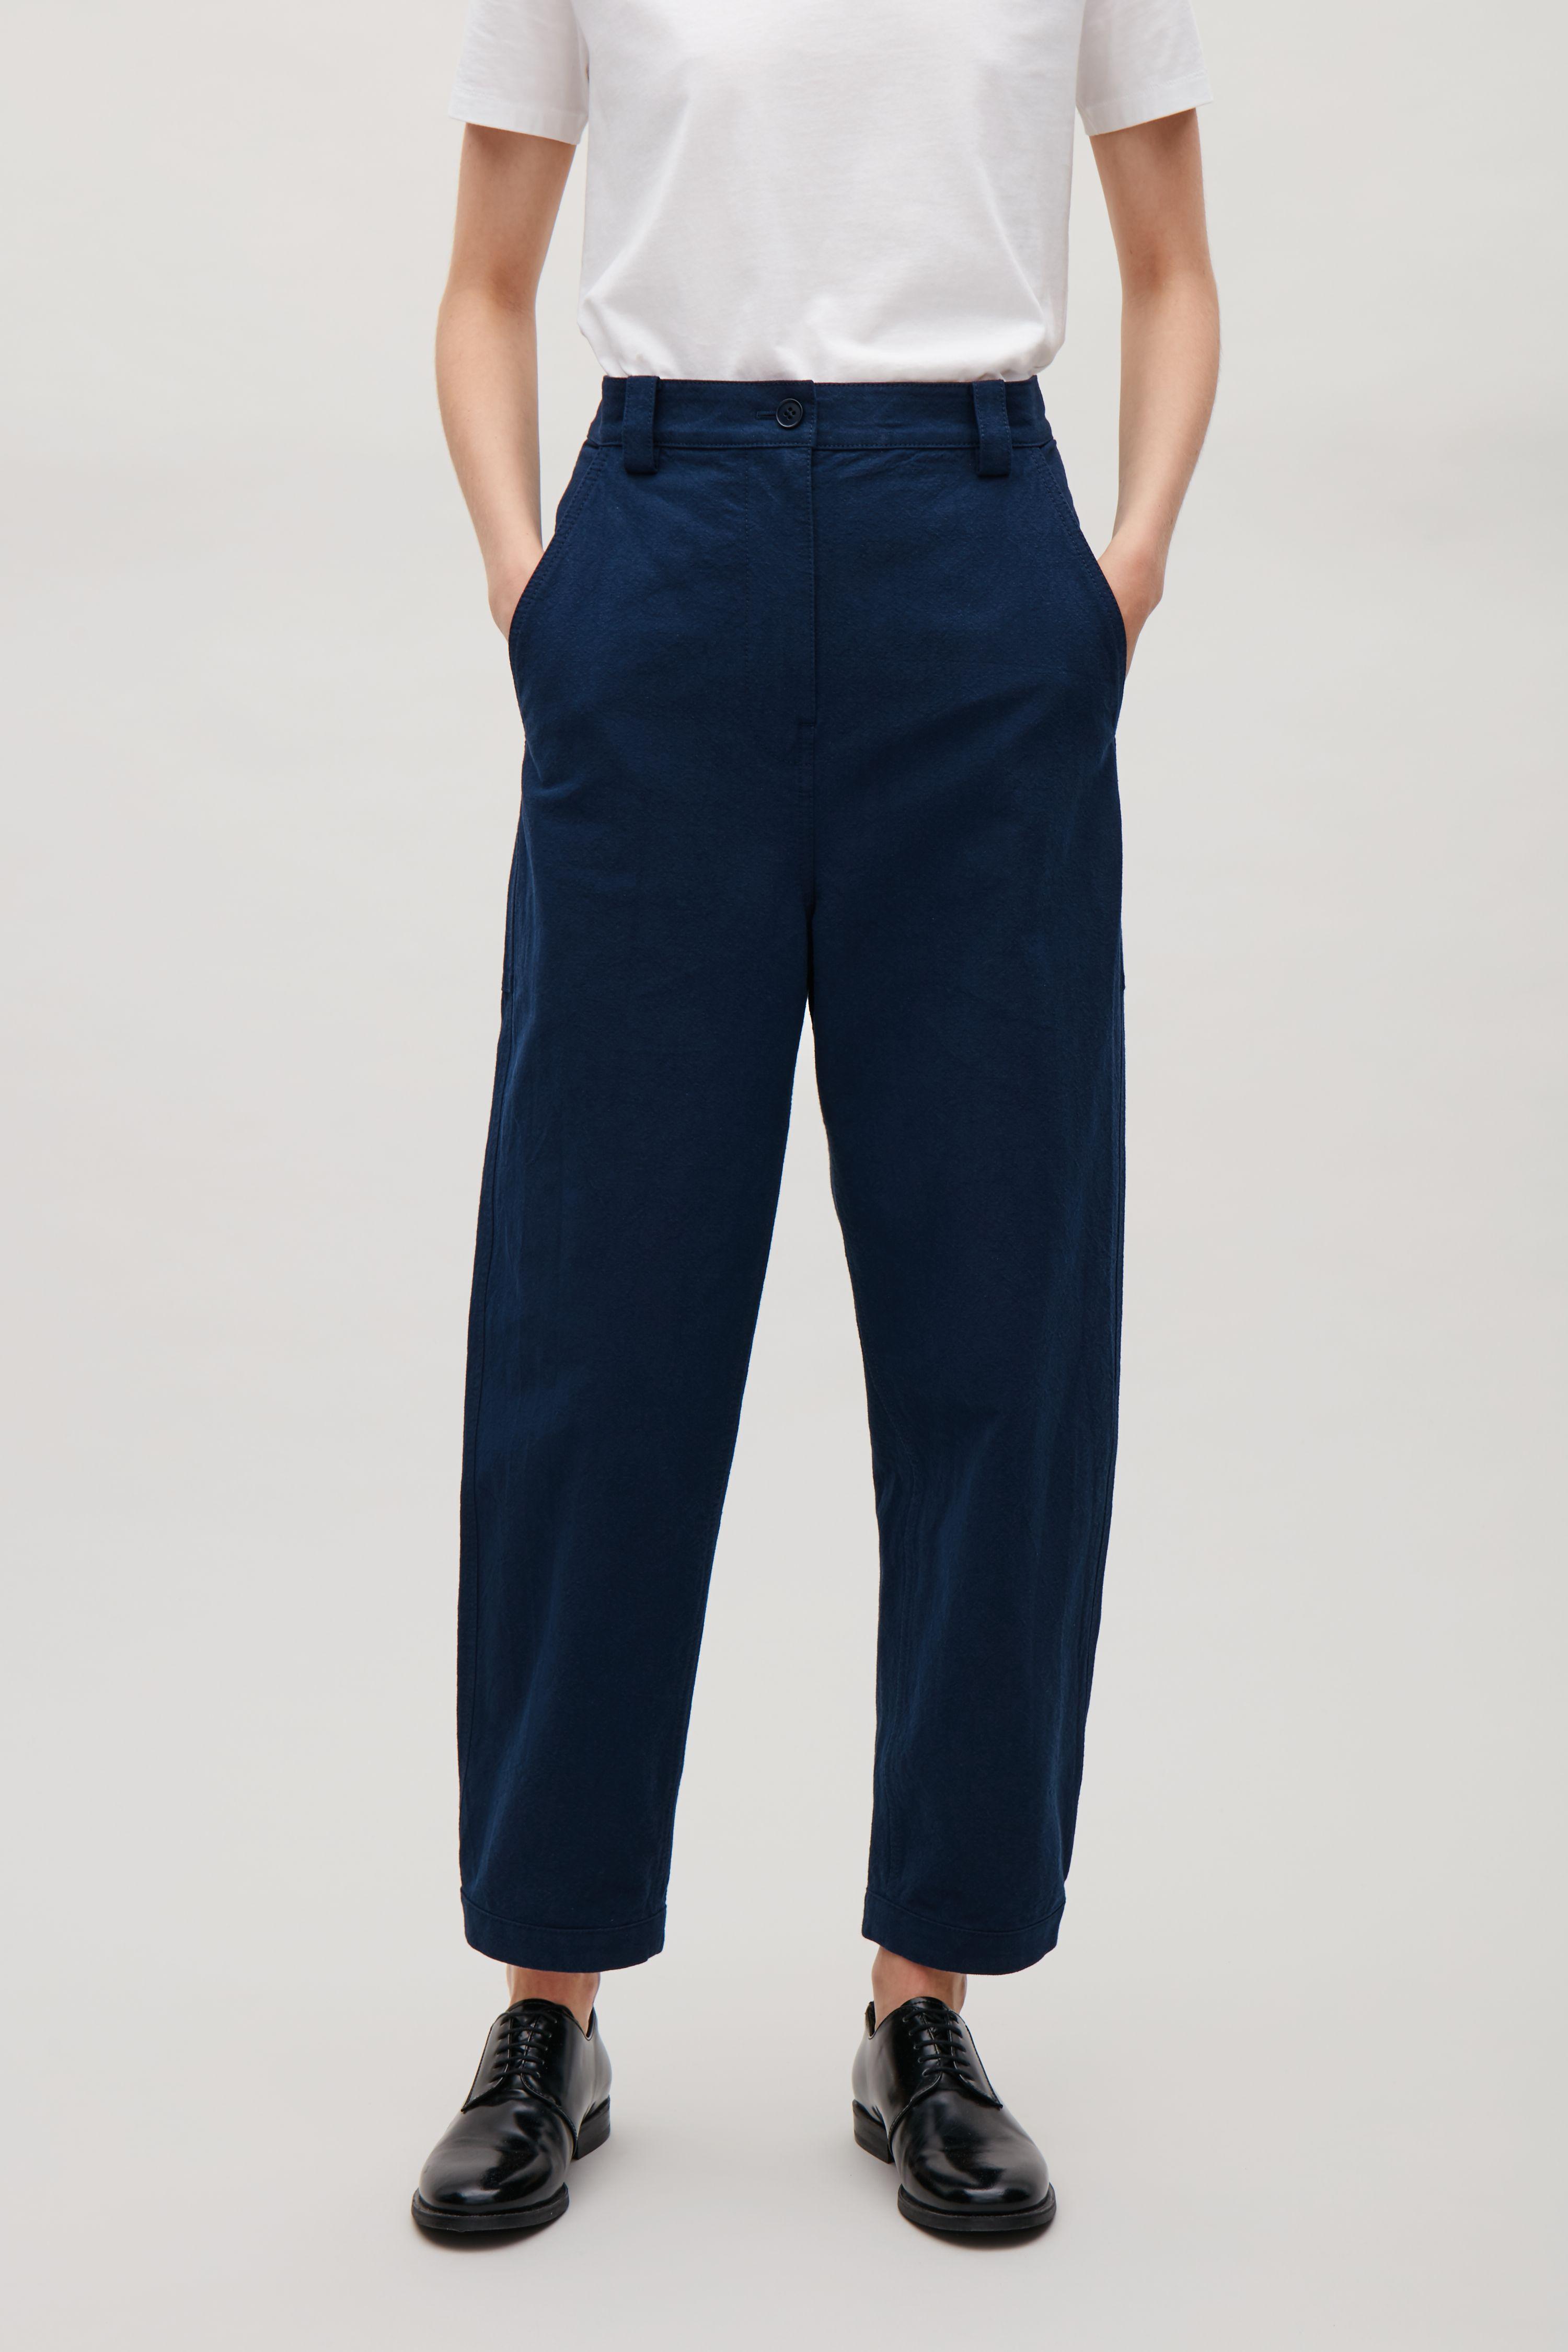 COS Cotton Trousers With Button Cuffs in Navy (Blue) - Lyst